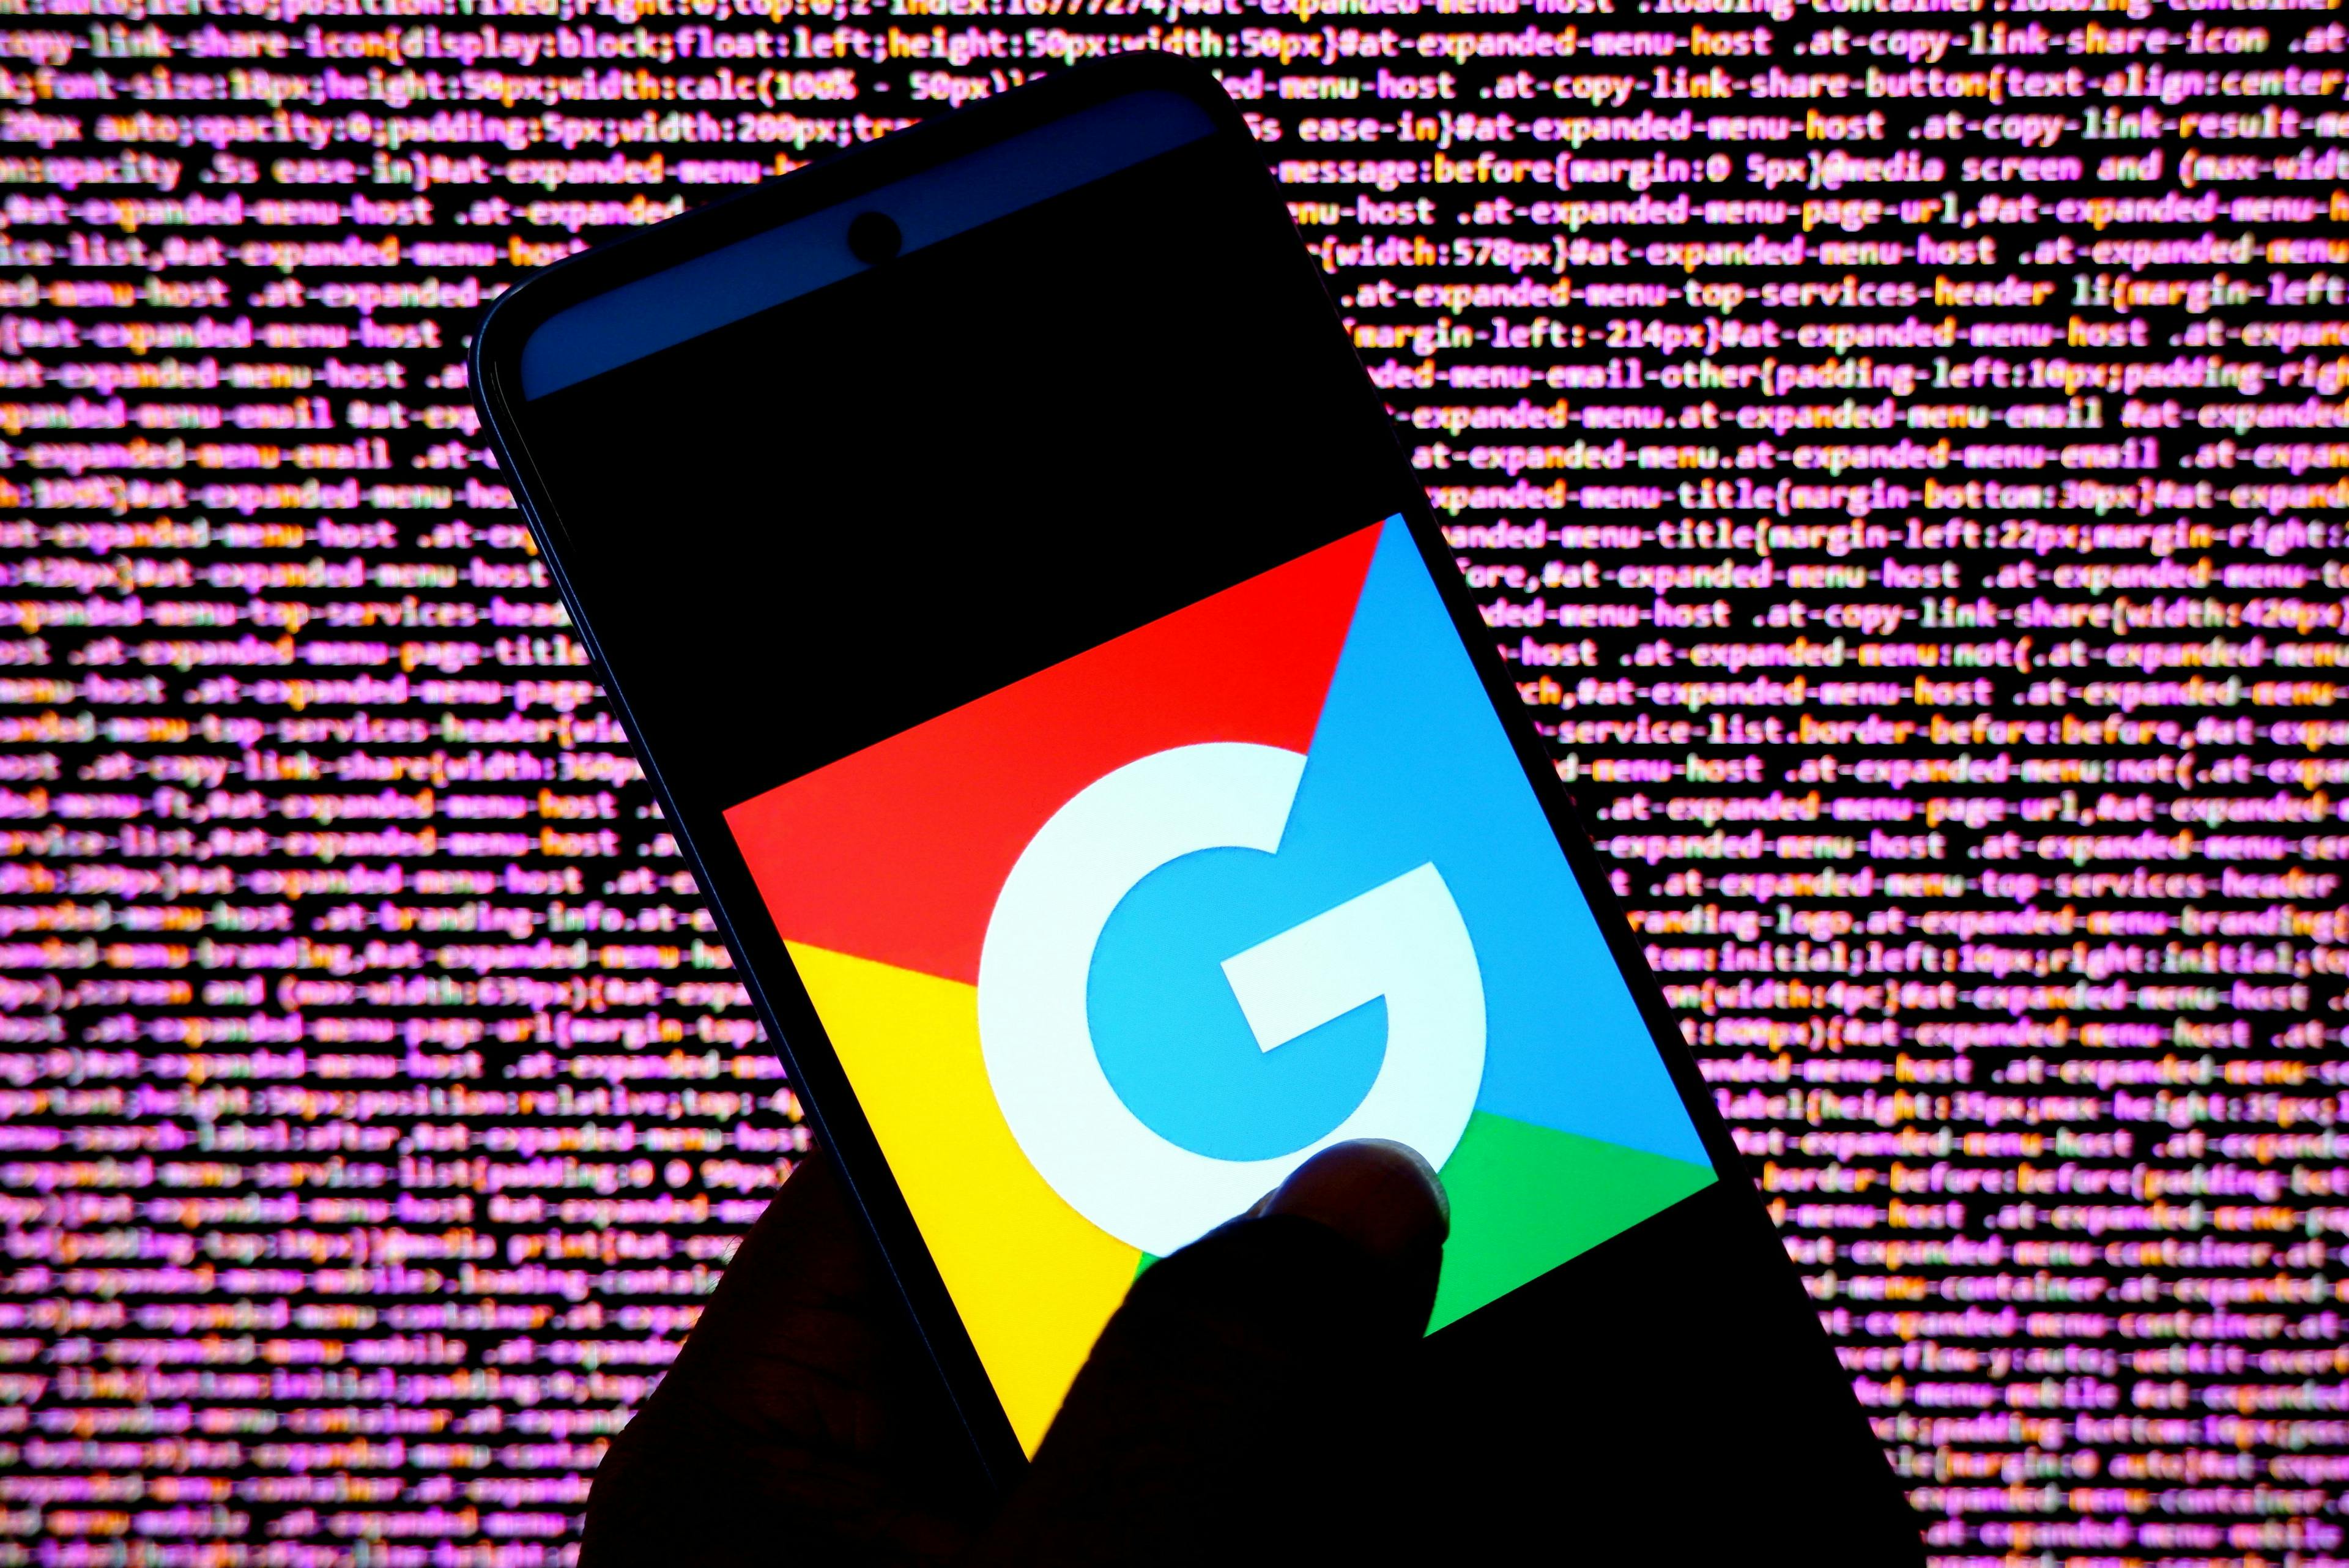 a Google logo appears on a silhouette of a smart phone in front of a wall of computer code